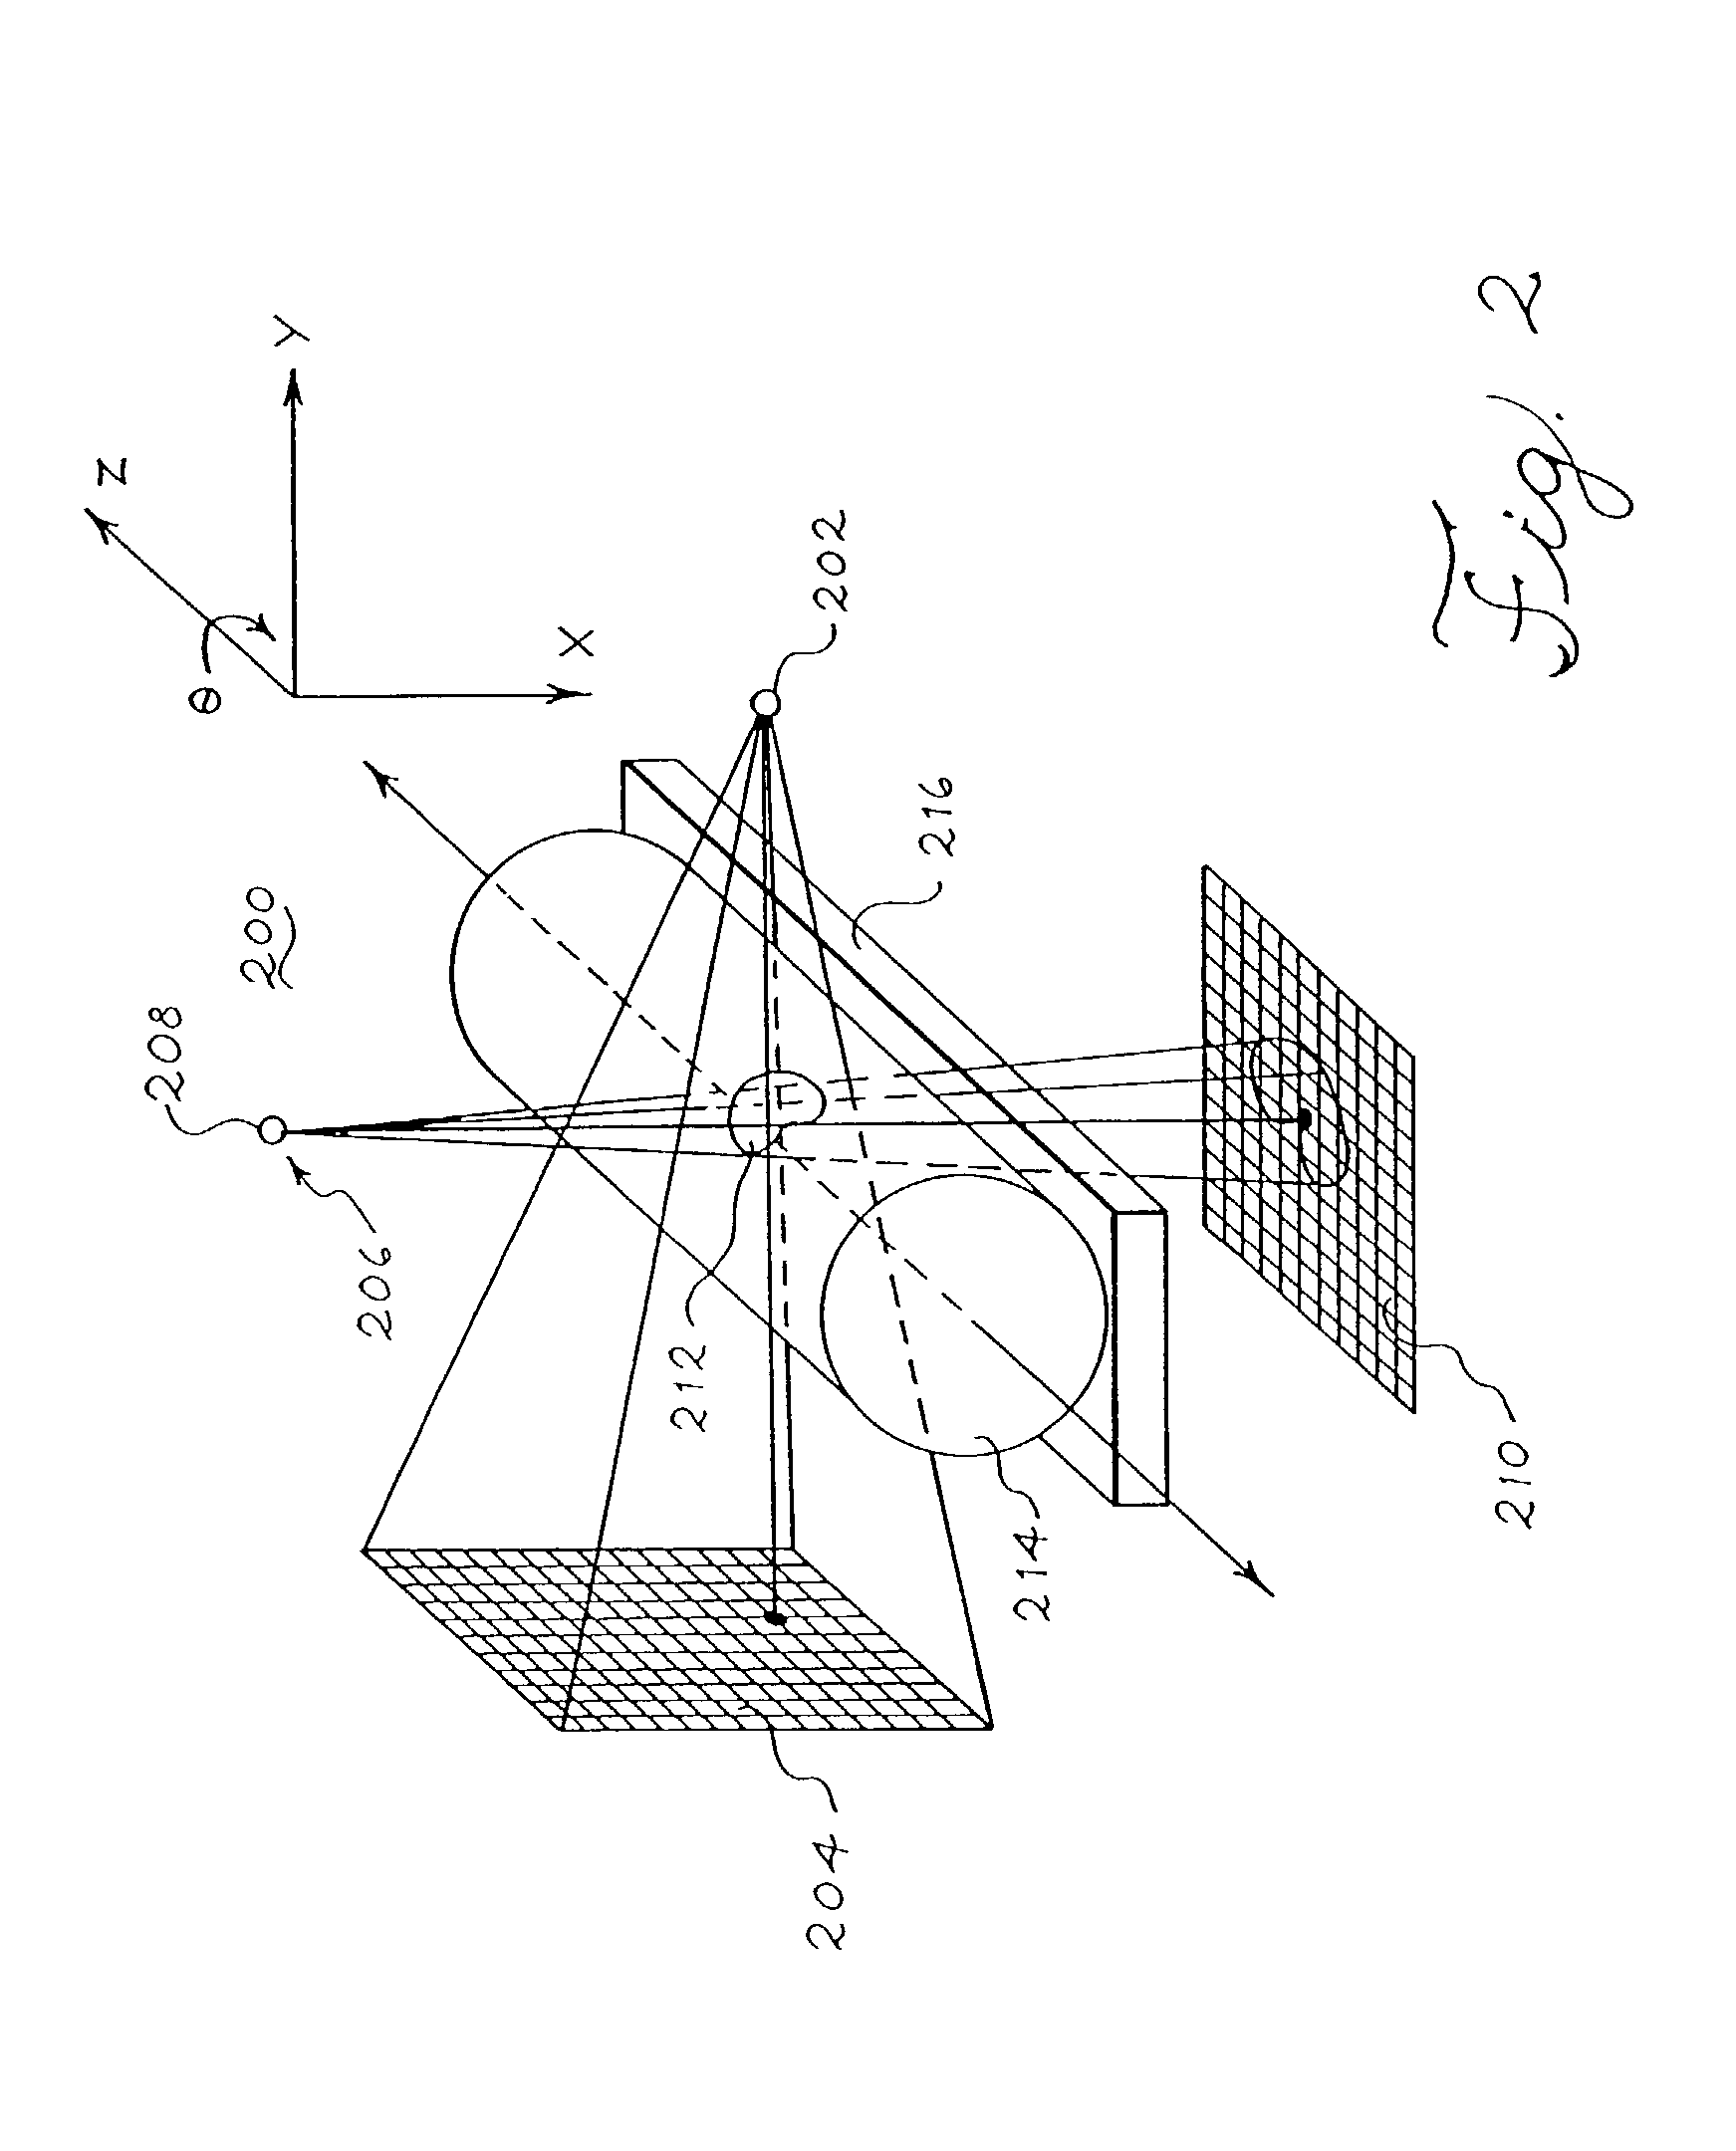 Cone-beam computerized tomography with a flat-panel imager